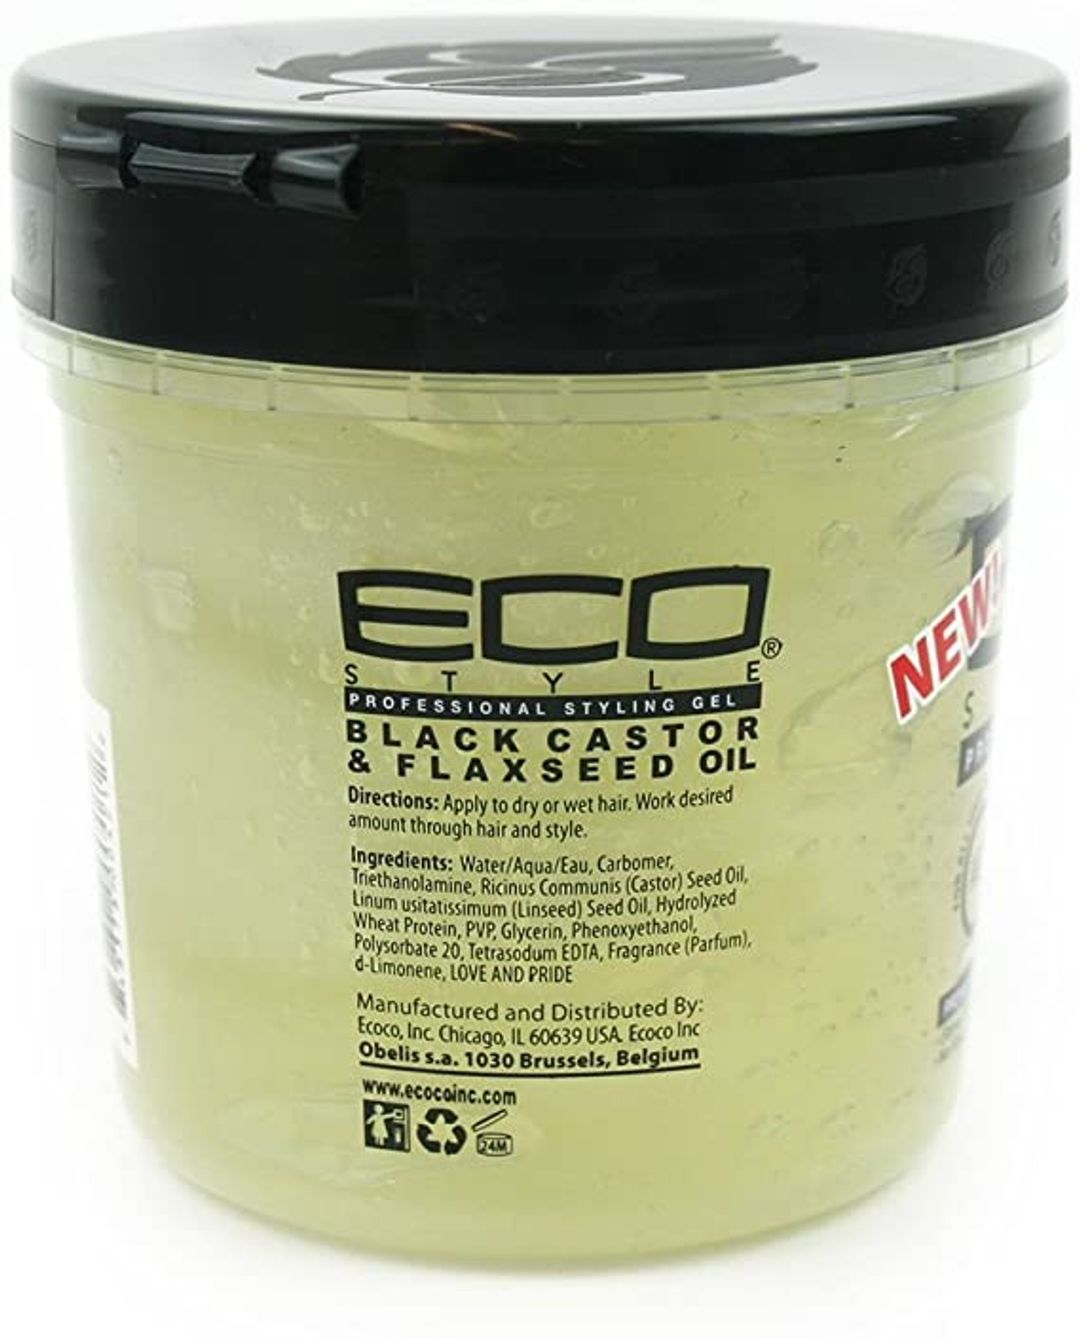 Eco Style Black Castor & Flaxseed Oil Styling Gel - 16oz